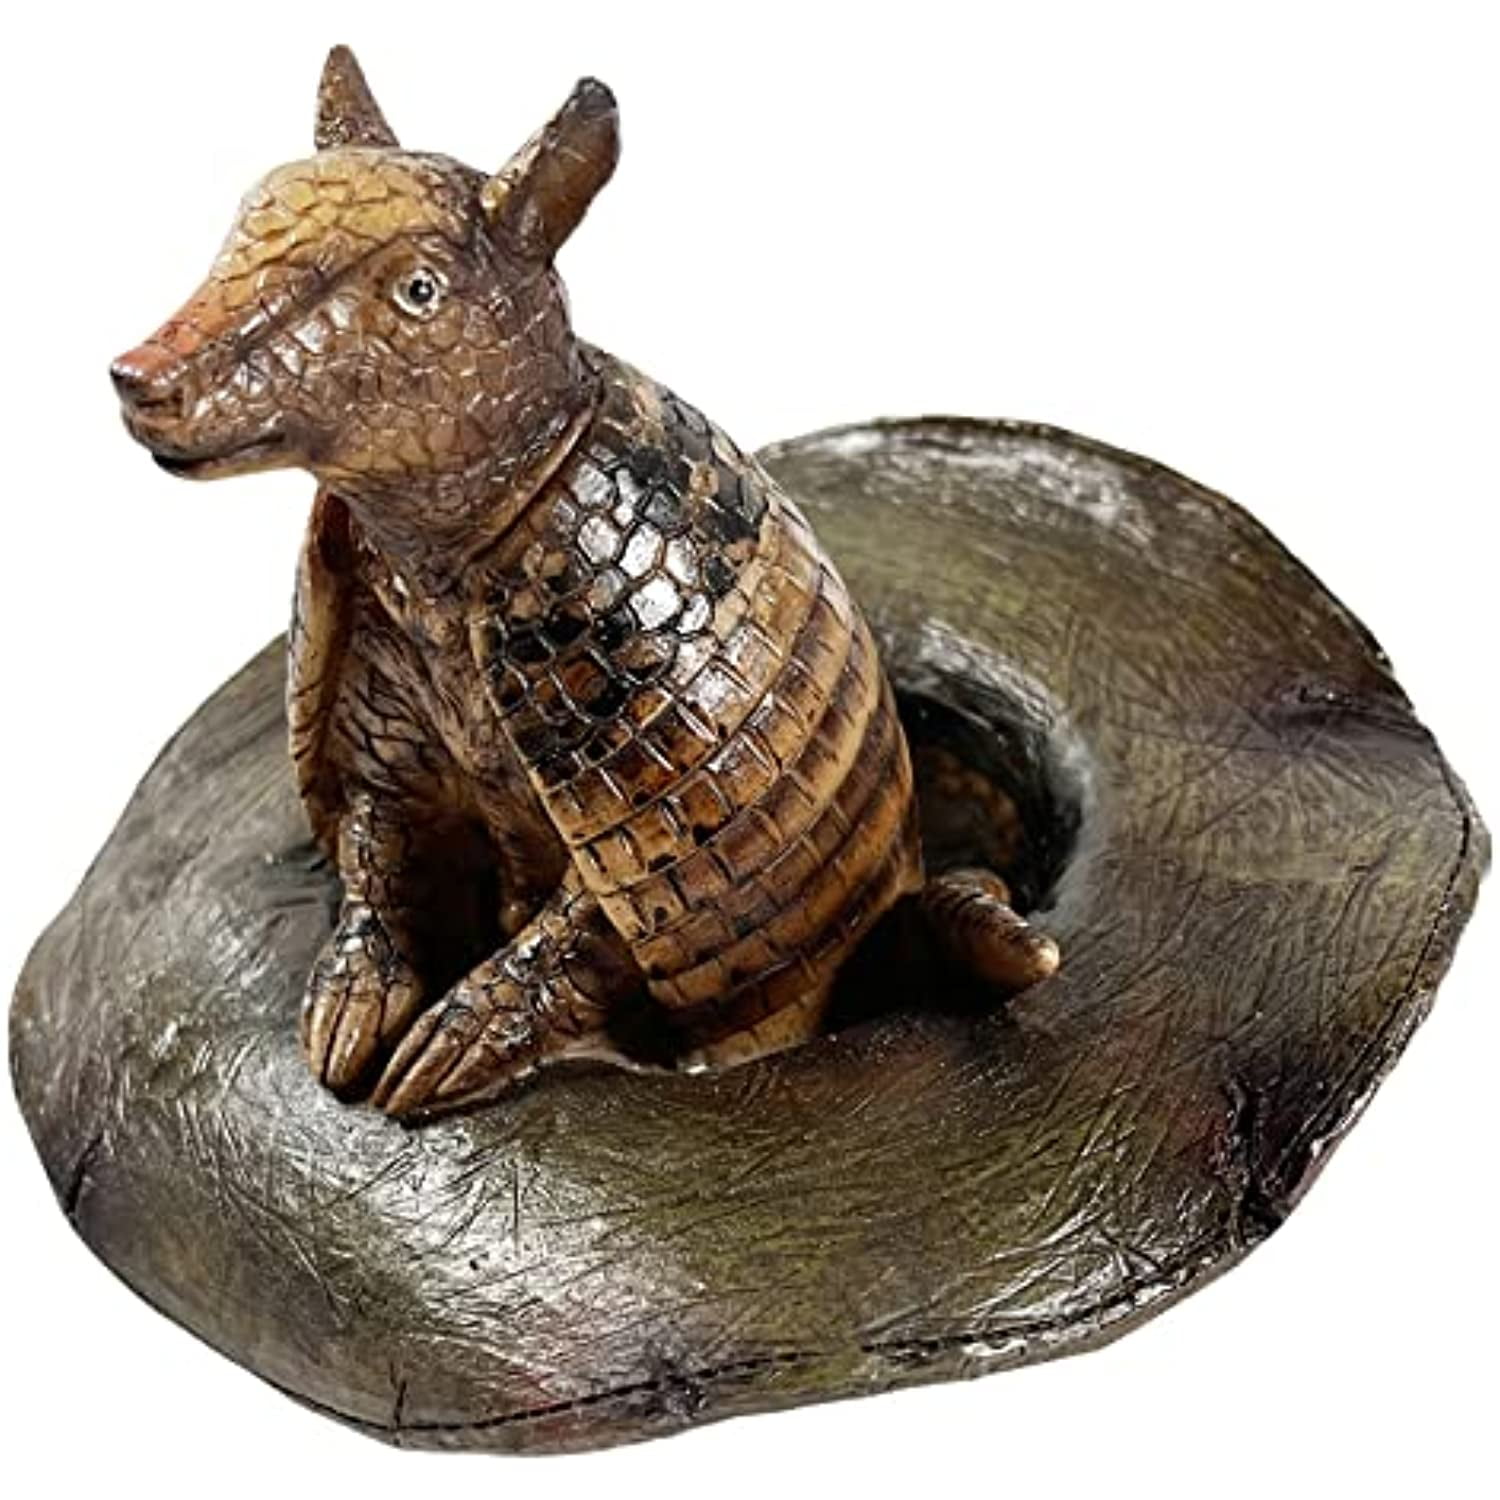 Urbalabs Western Wood Metal Resin and Rustic Wall Hooks and Armadillo Key  Holder Wall Hook Mounted Decorative for Hats, Coats, Towels, Mudroom,  Rustic Western Decor (Armadillo) 